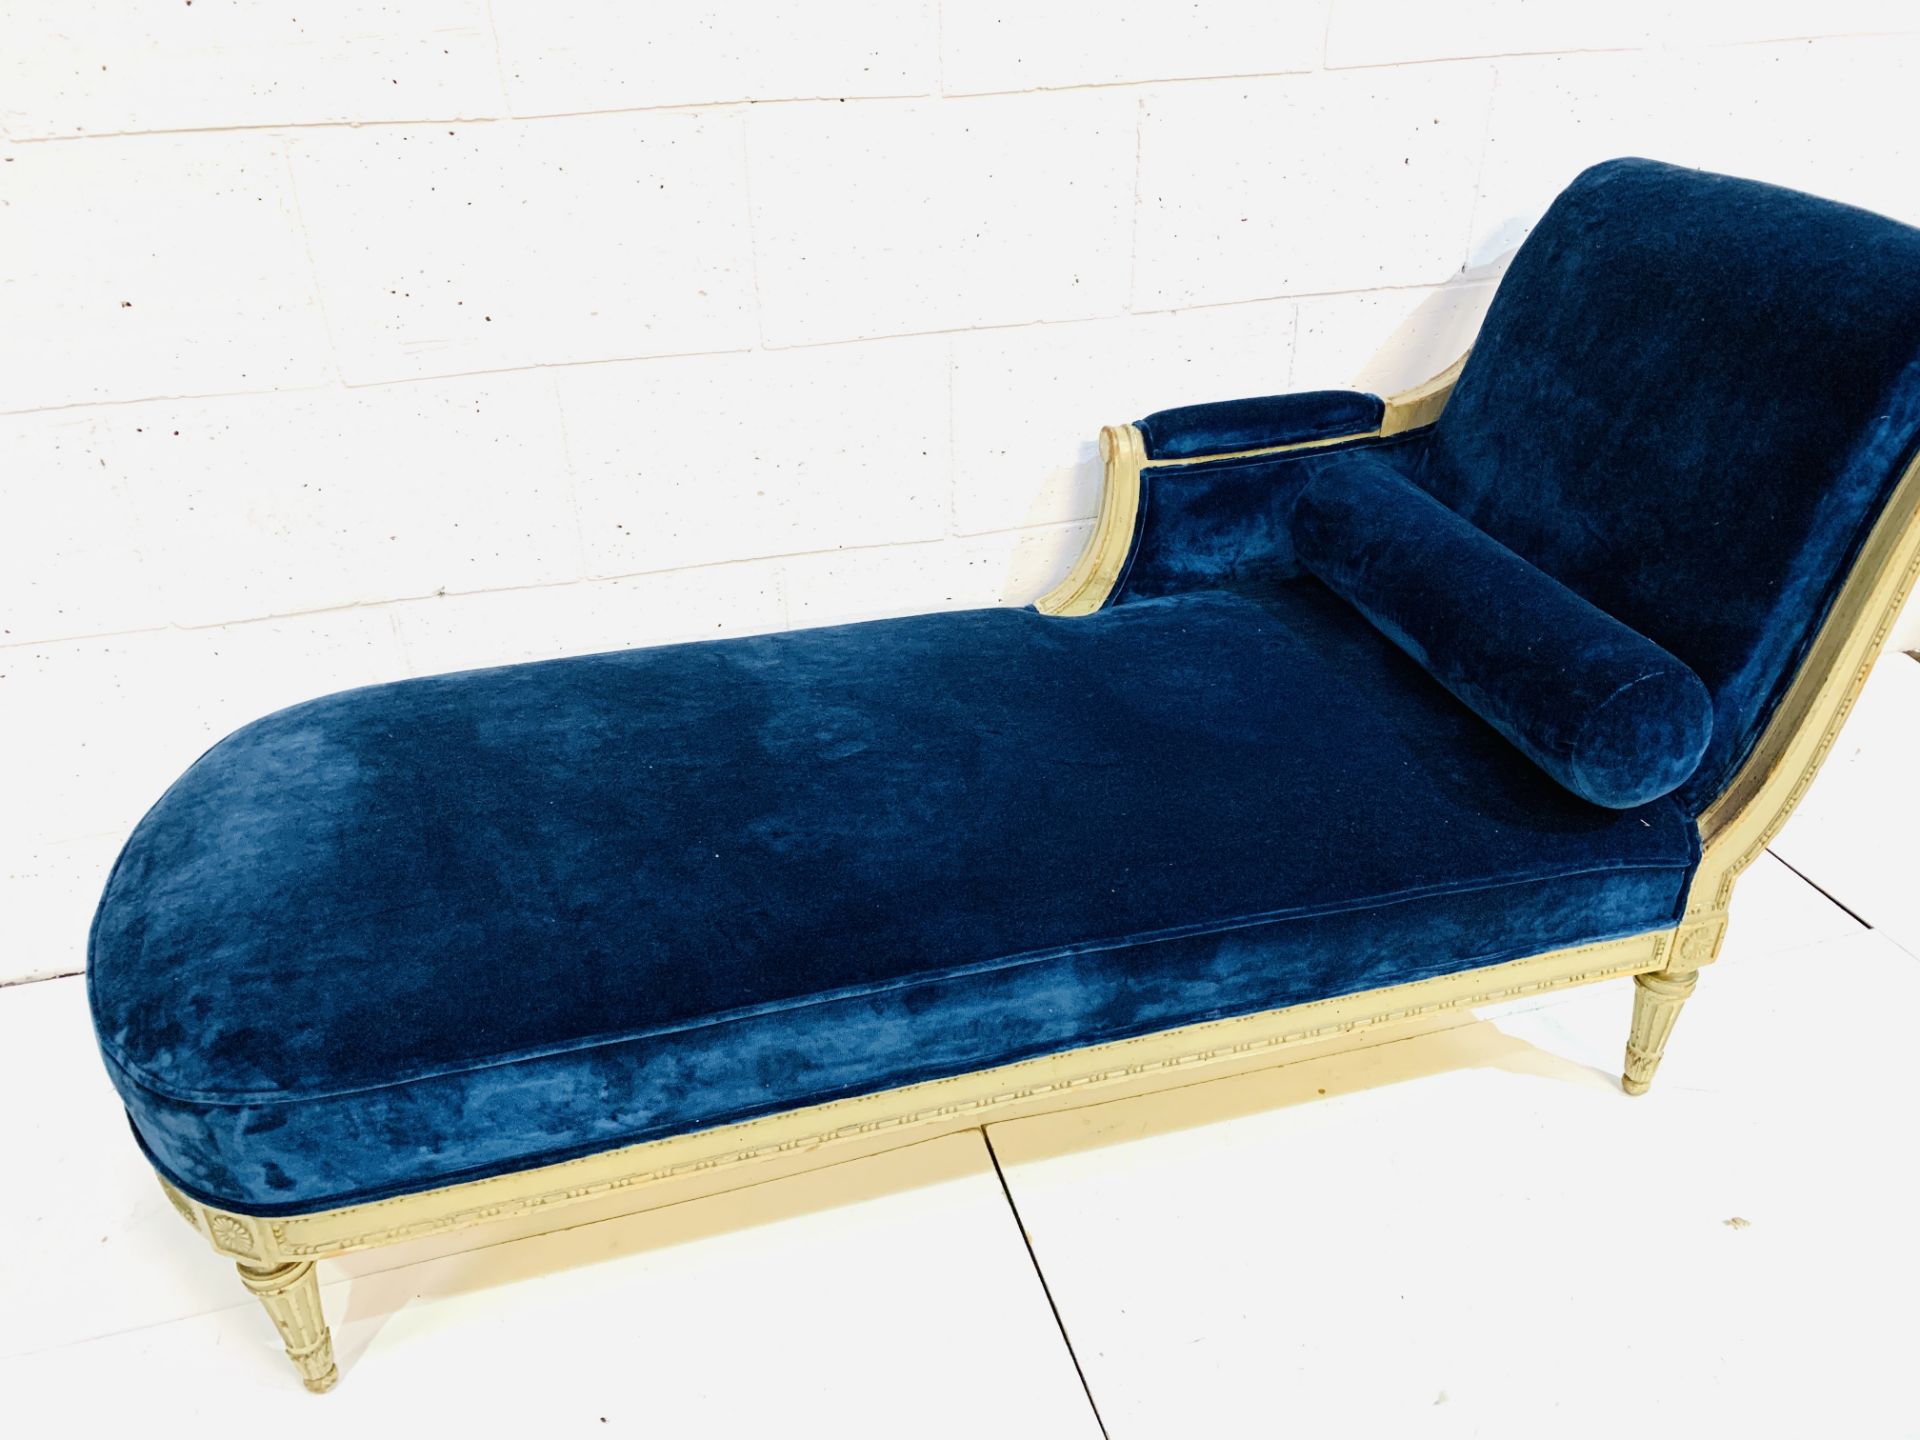 French Empire style chaise longue - Image 3 of 4